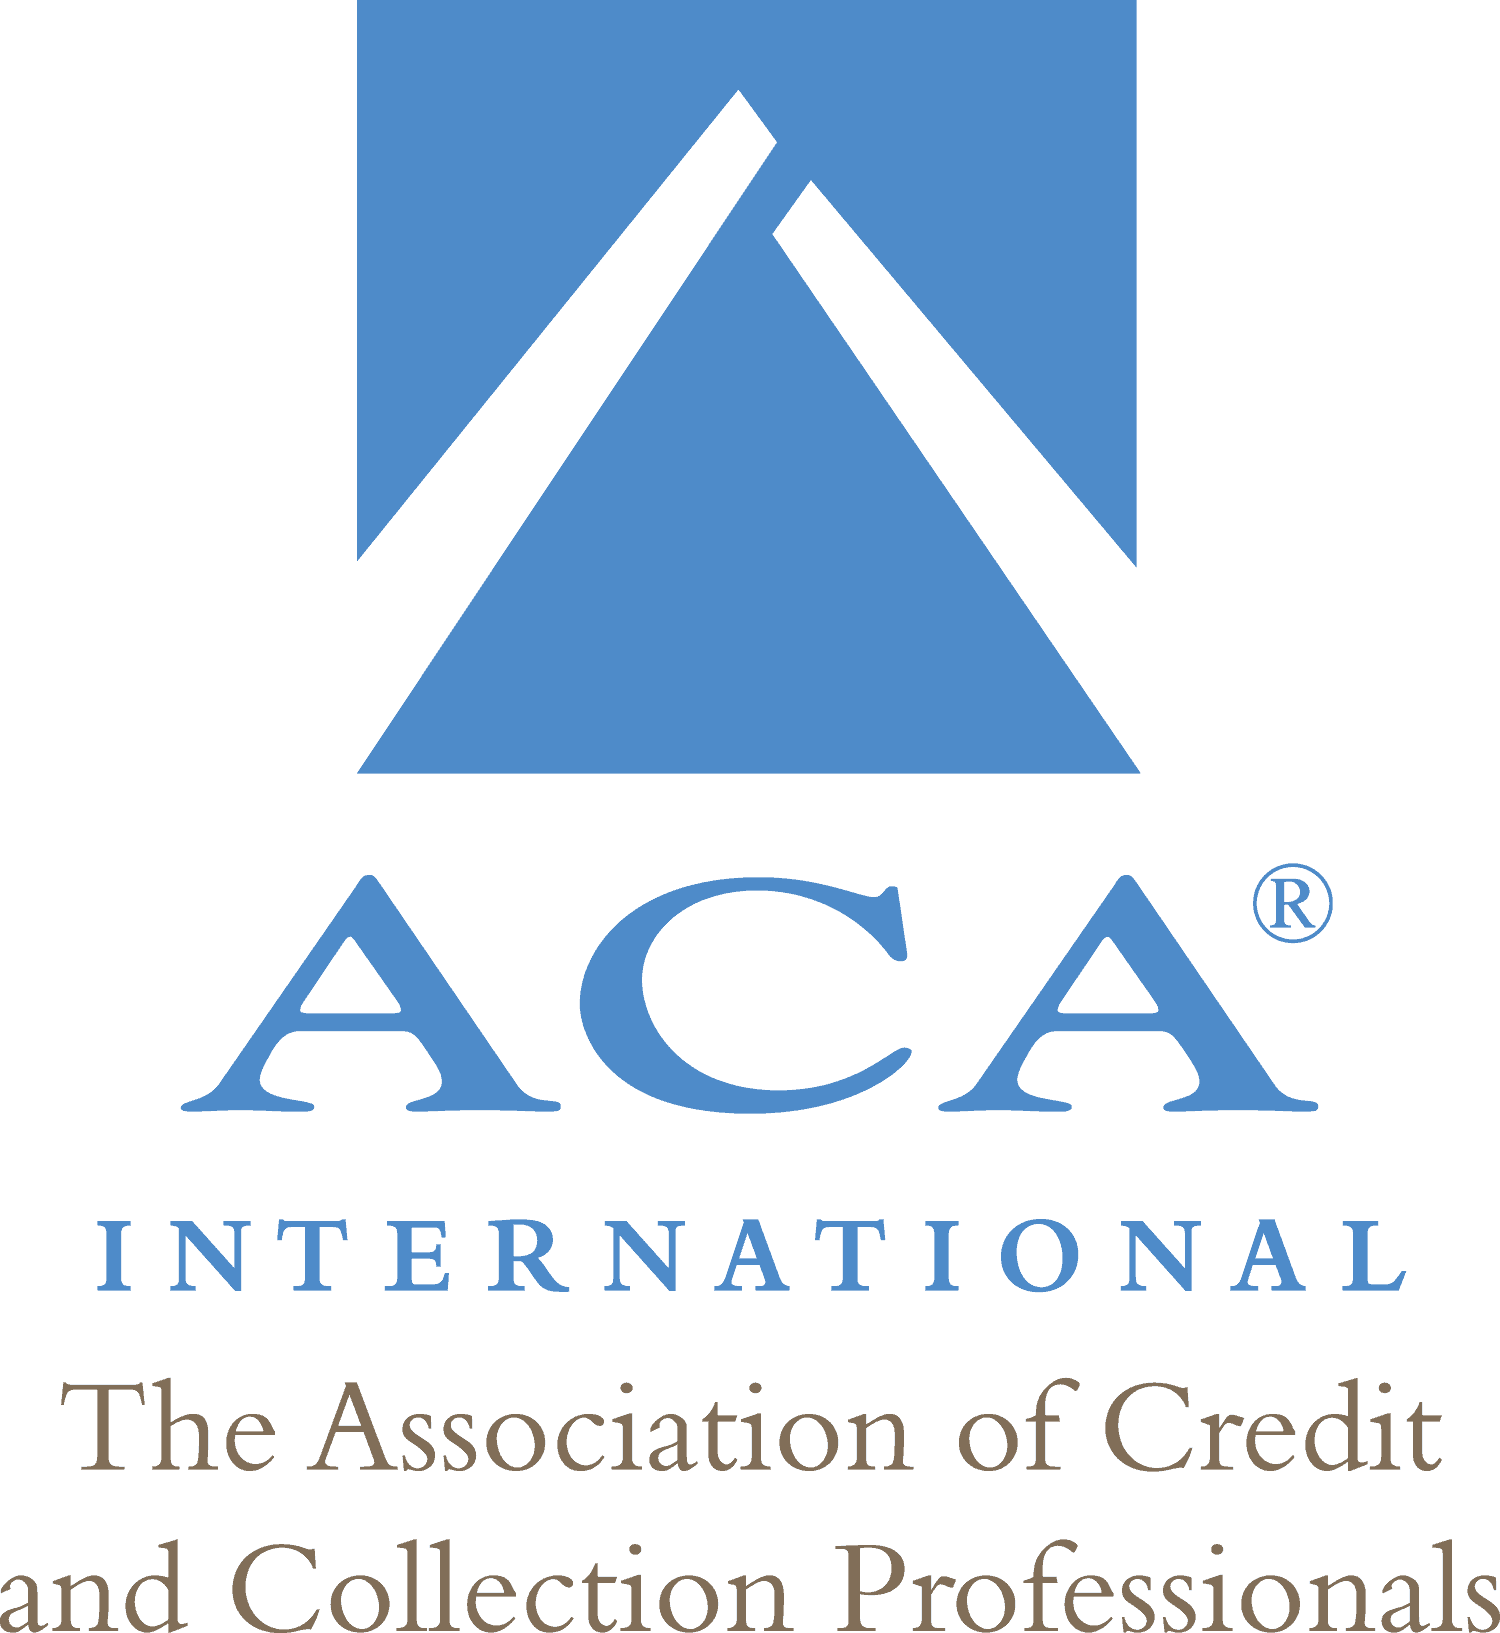 Beam Software is now certified with ACA International